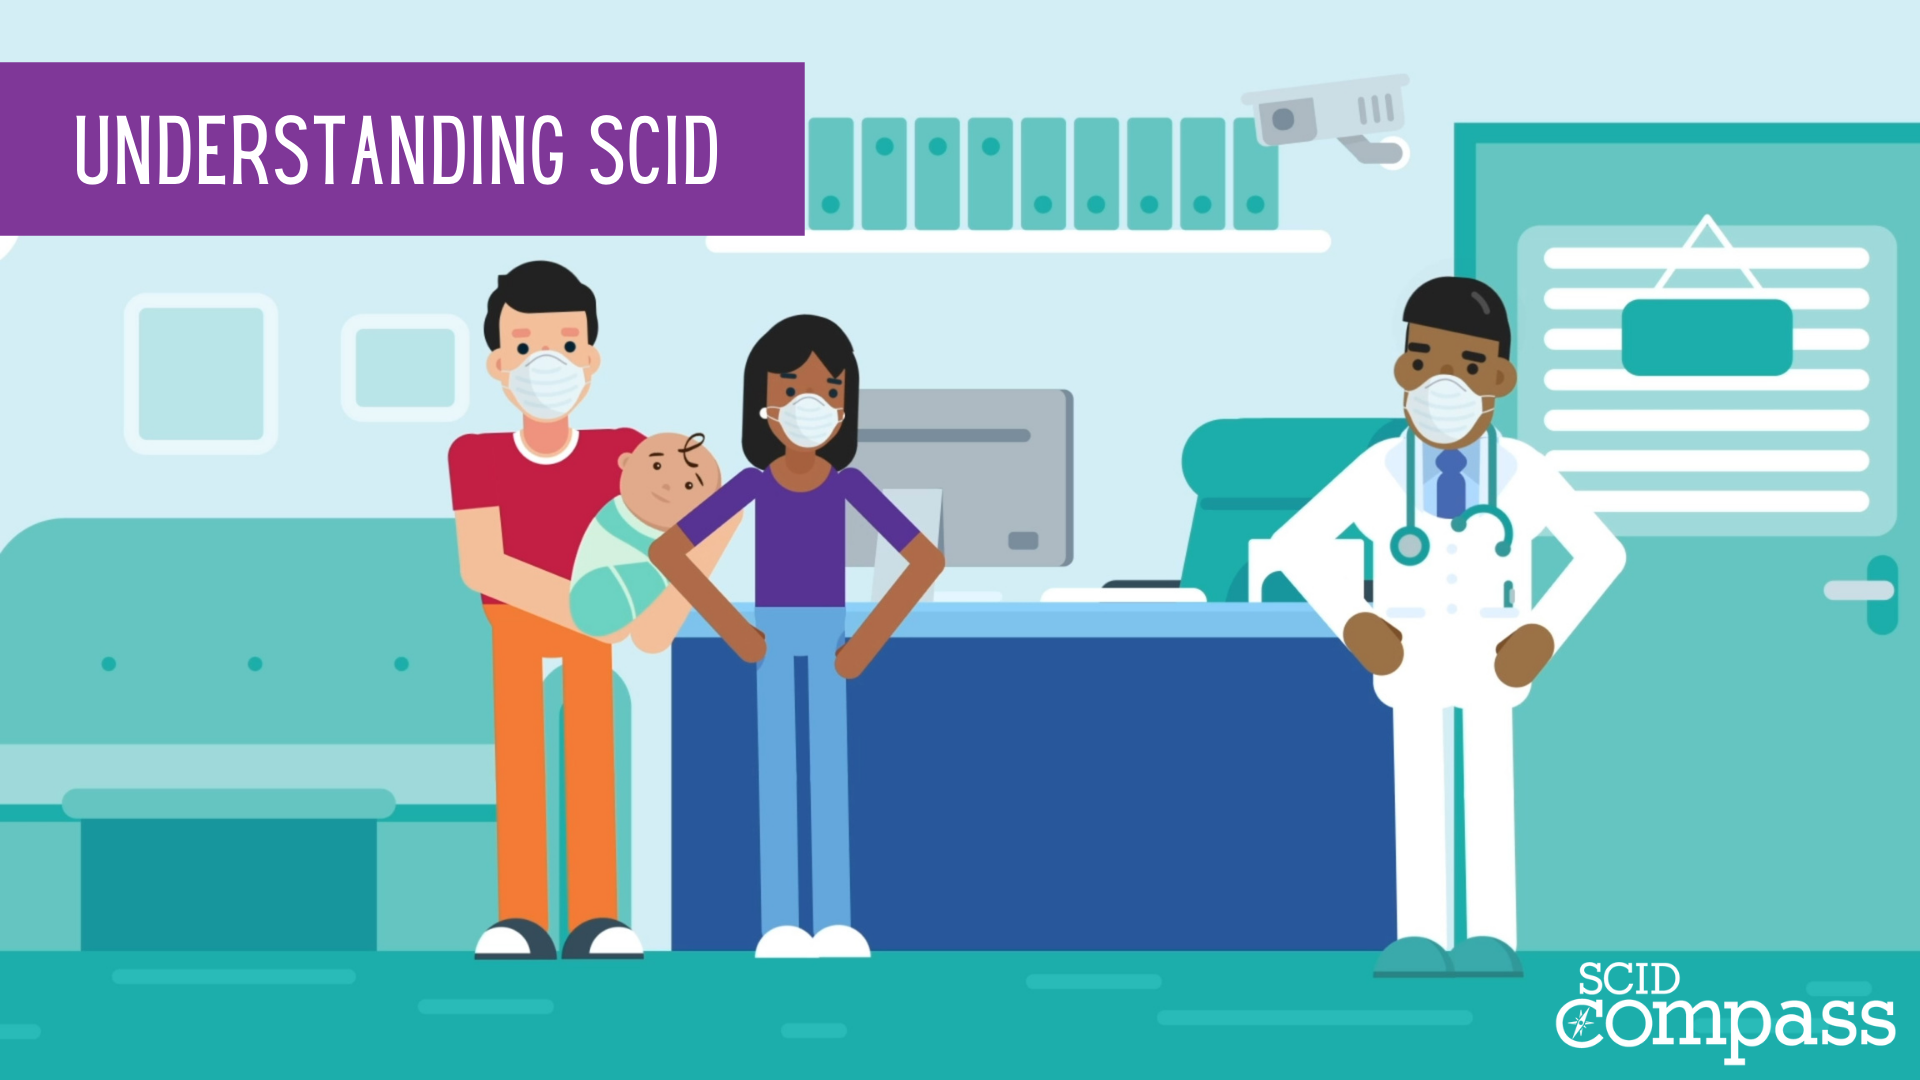 what research has been conducted about scid